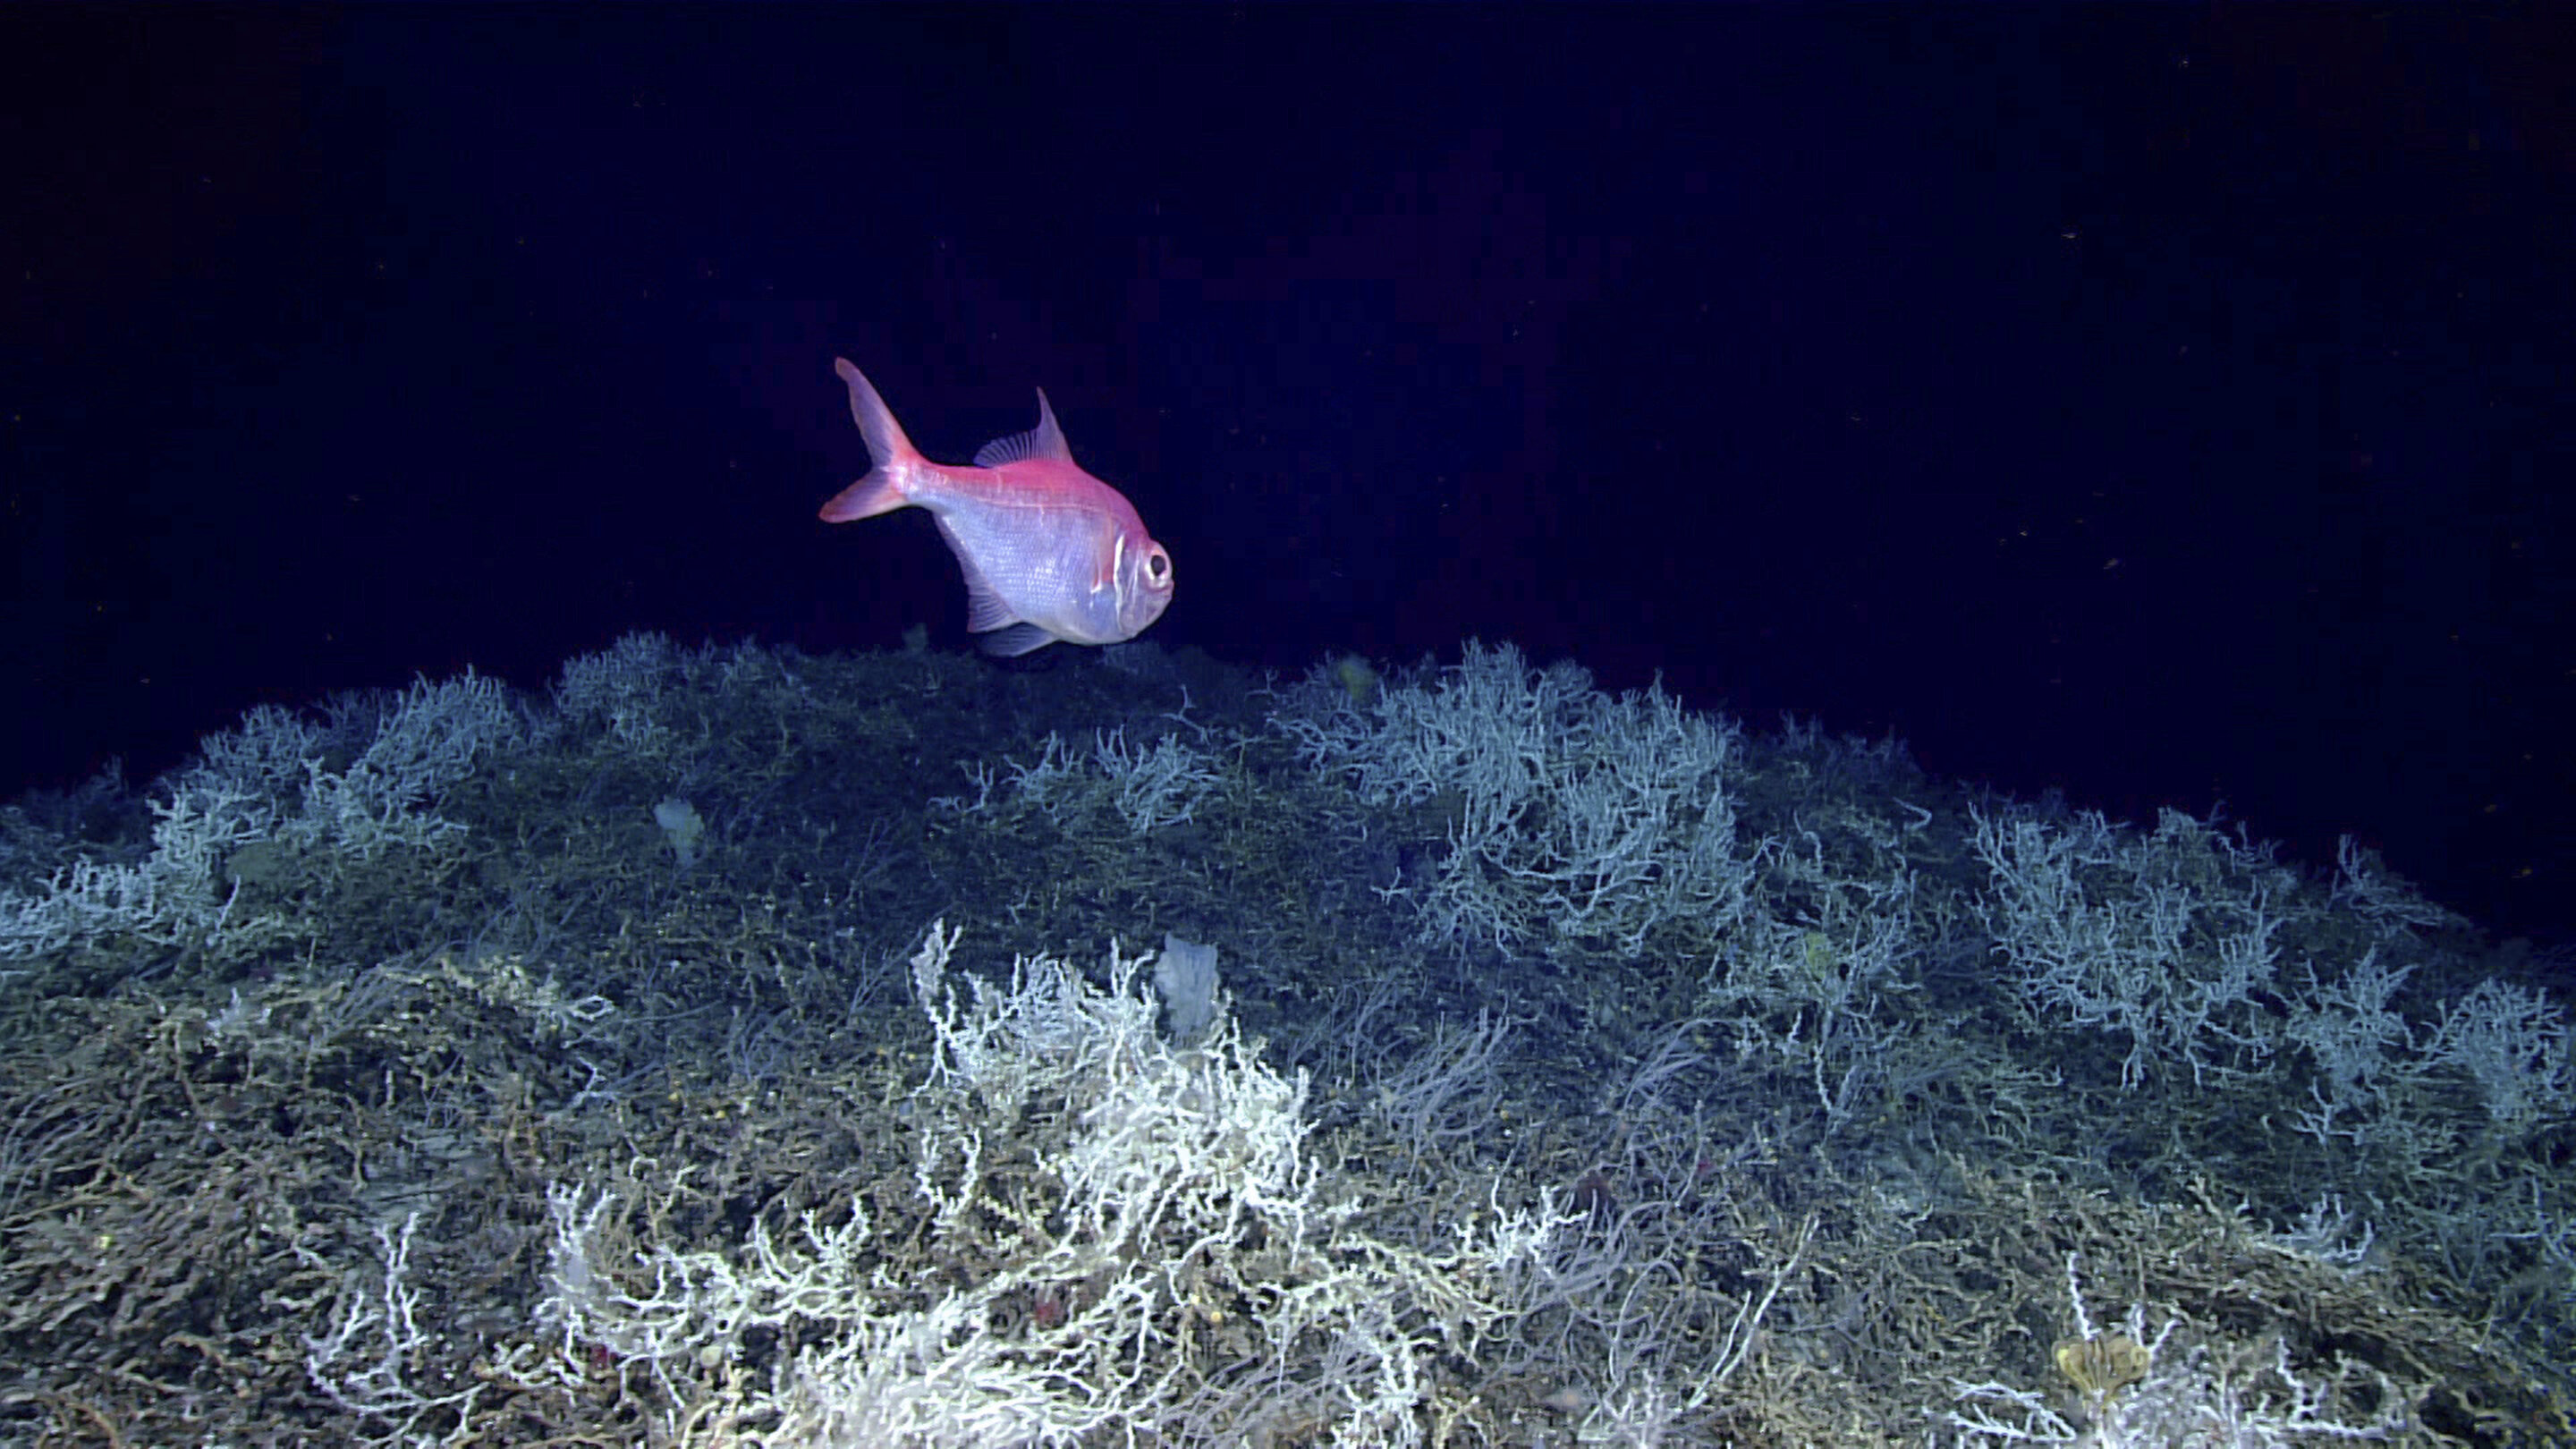 Largest deep-sea coral reef to date is mapped by scientists off the US  Atlantic coast